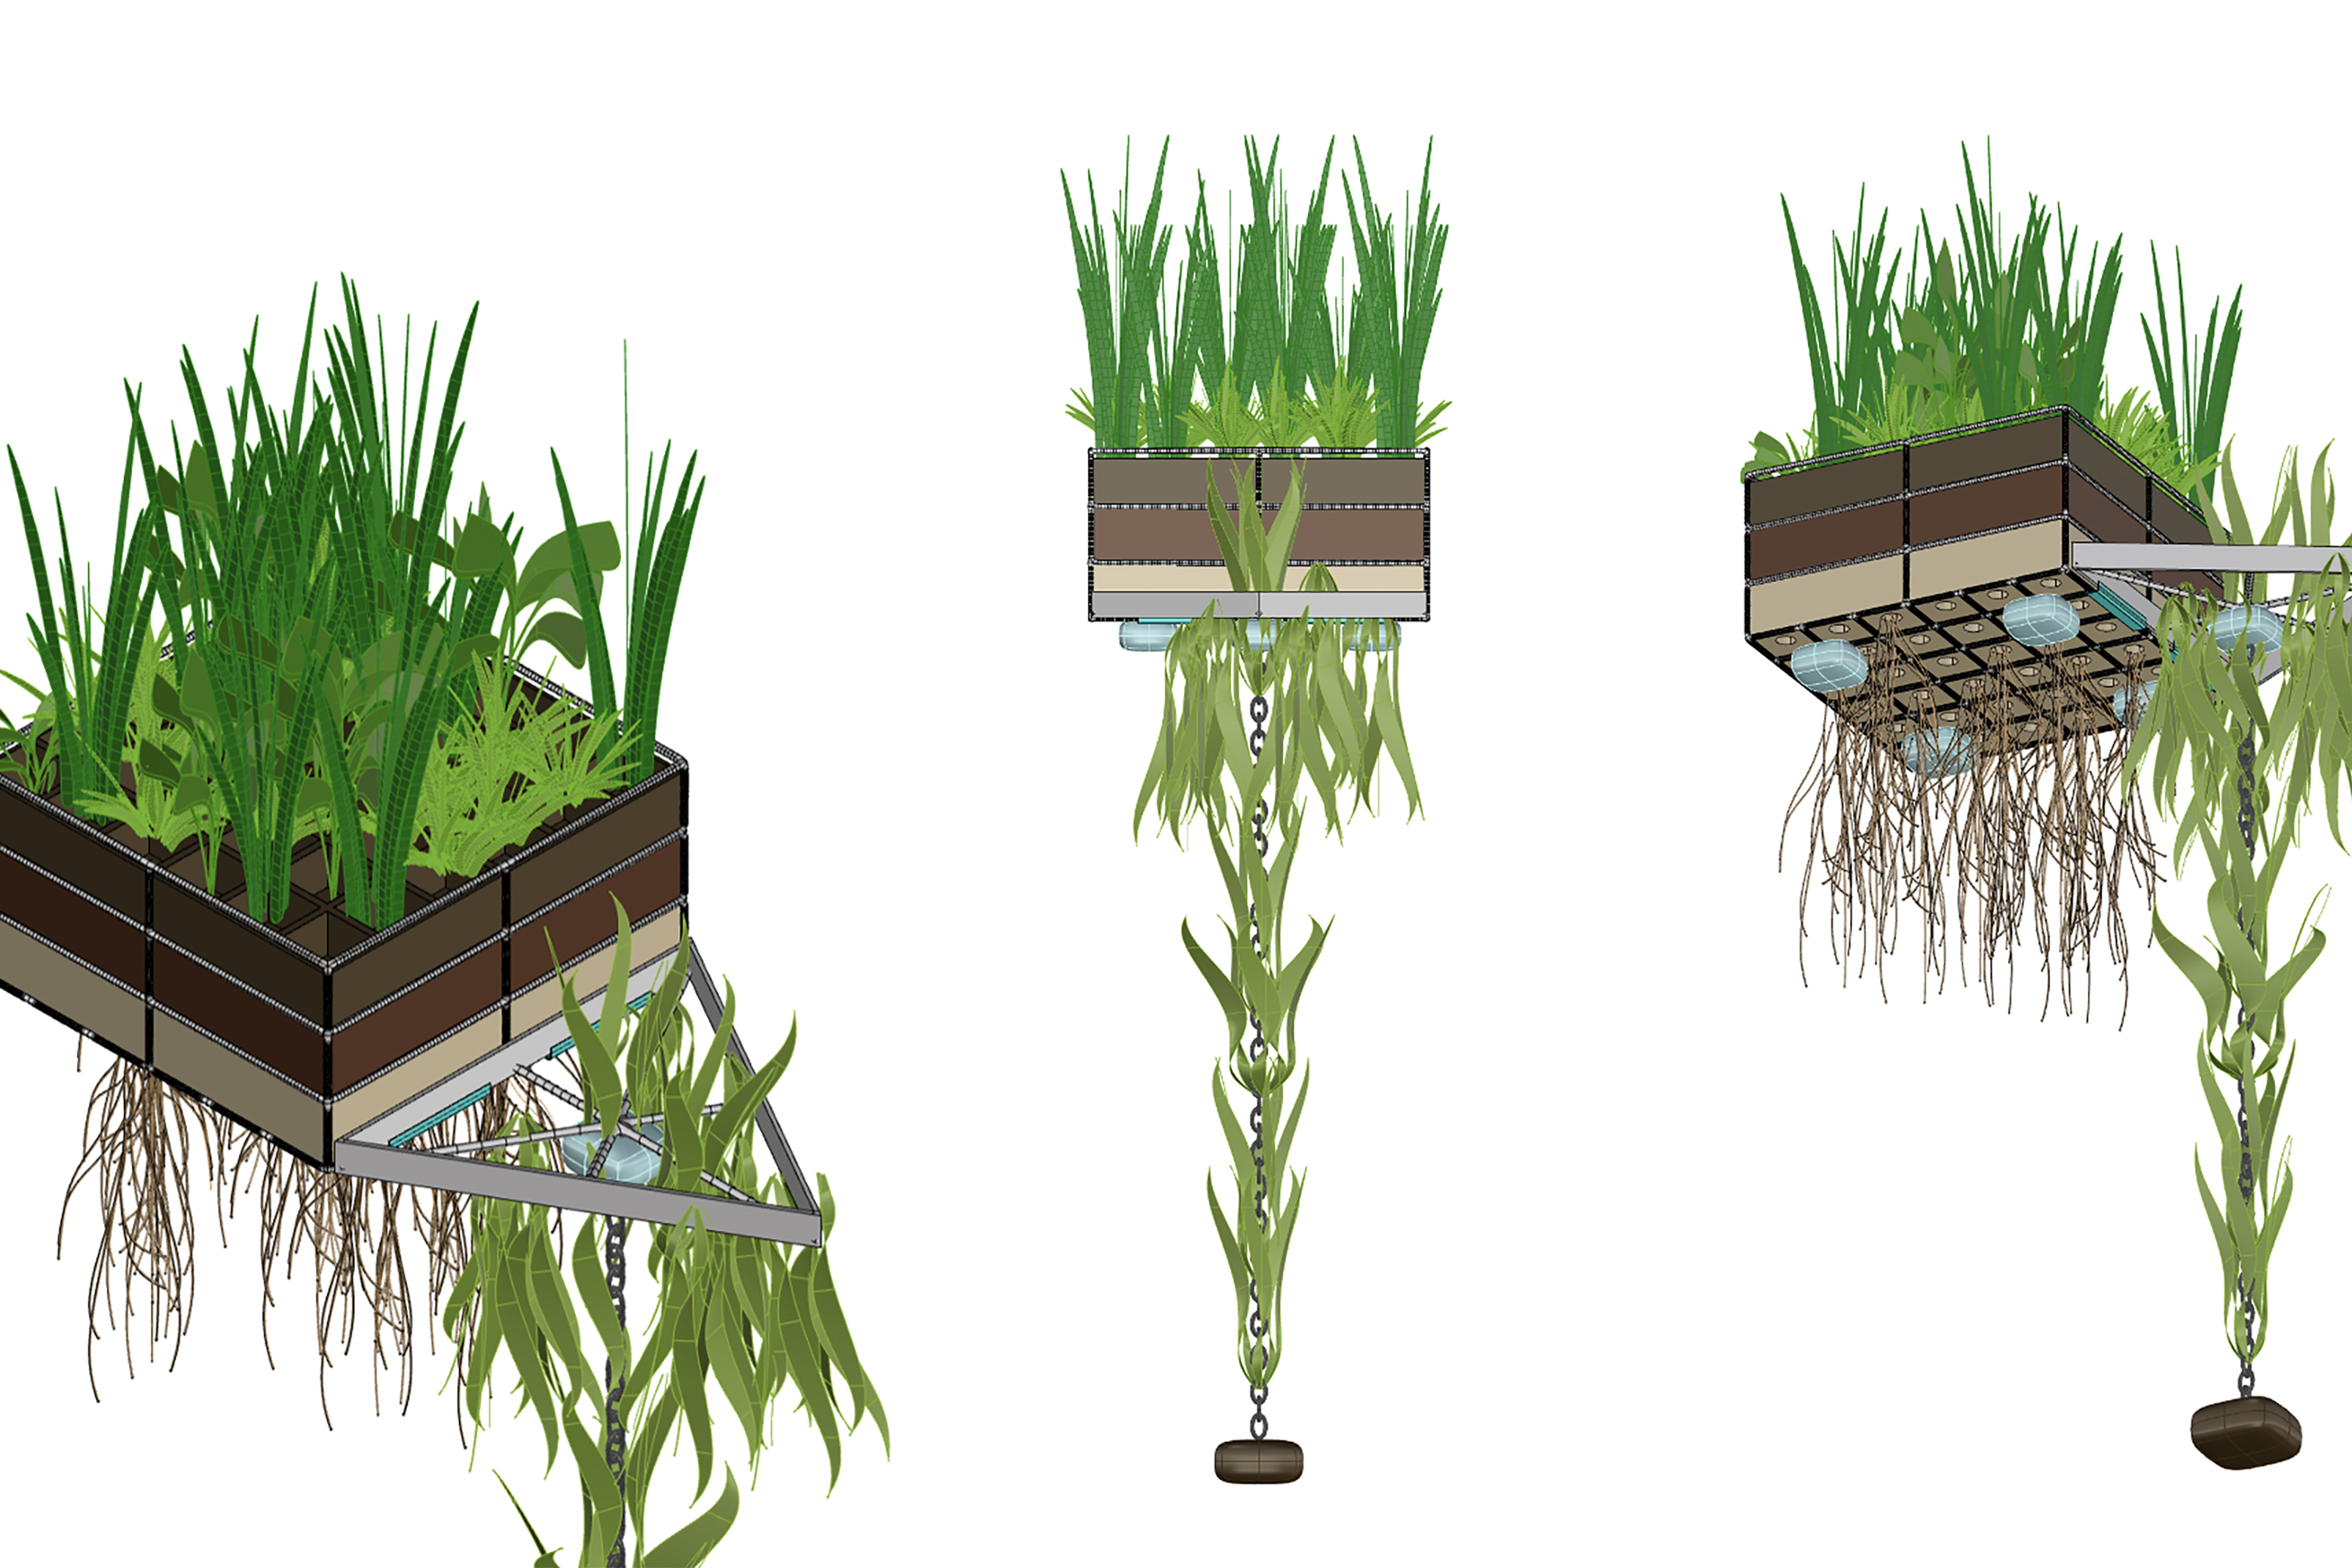 Manini Banjeree's Biopod, a floating box of non-synthetic plants with root systems that naturally purify water